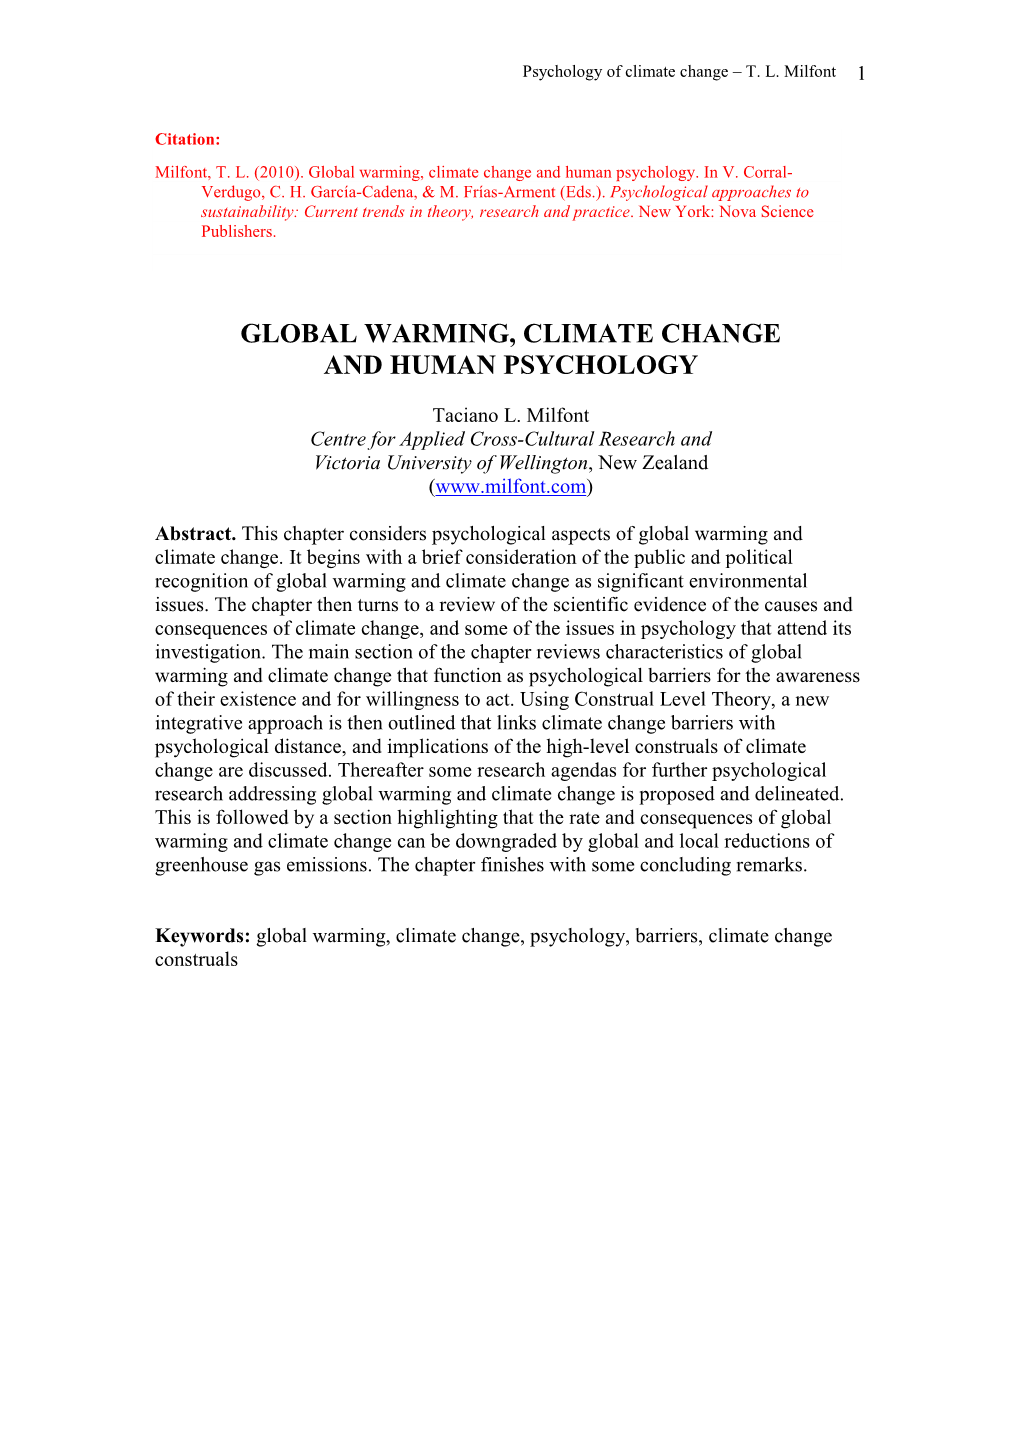 Global Warming, Climate Change and Human Psychology